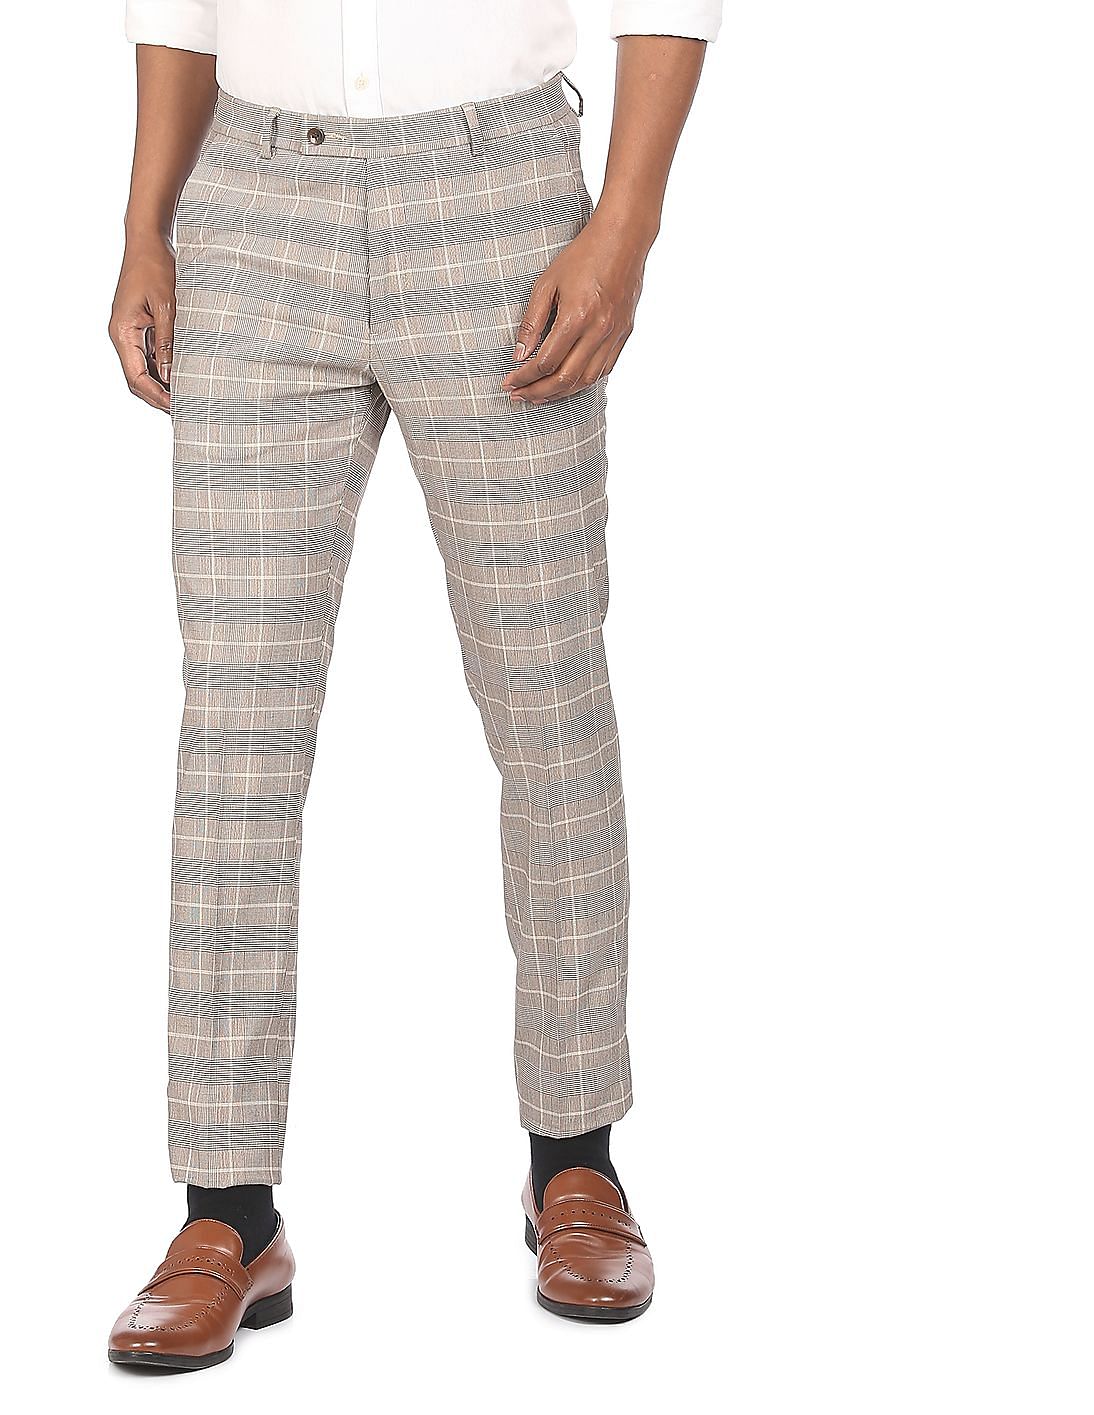 Intellieaze Combed Cotton Men Checkered Red Track Pants Price in India  Full Specifications  Offers  DTashioncom